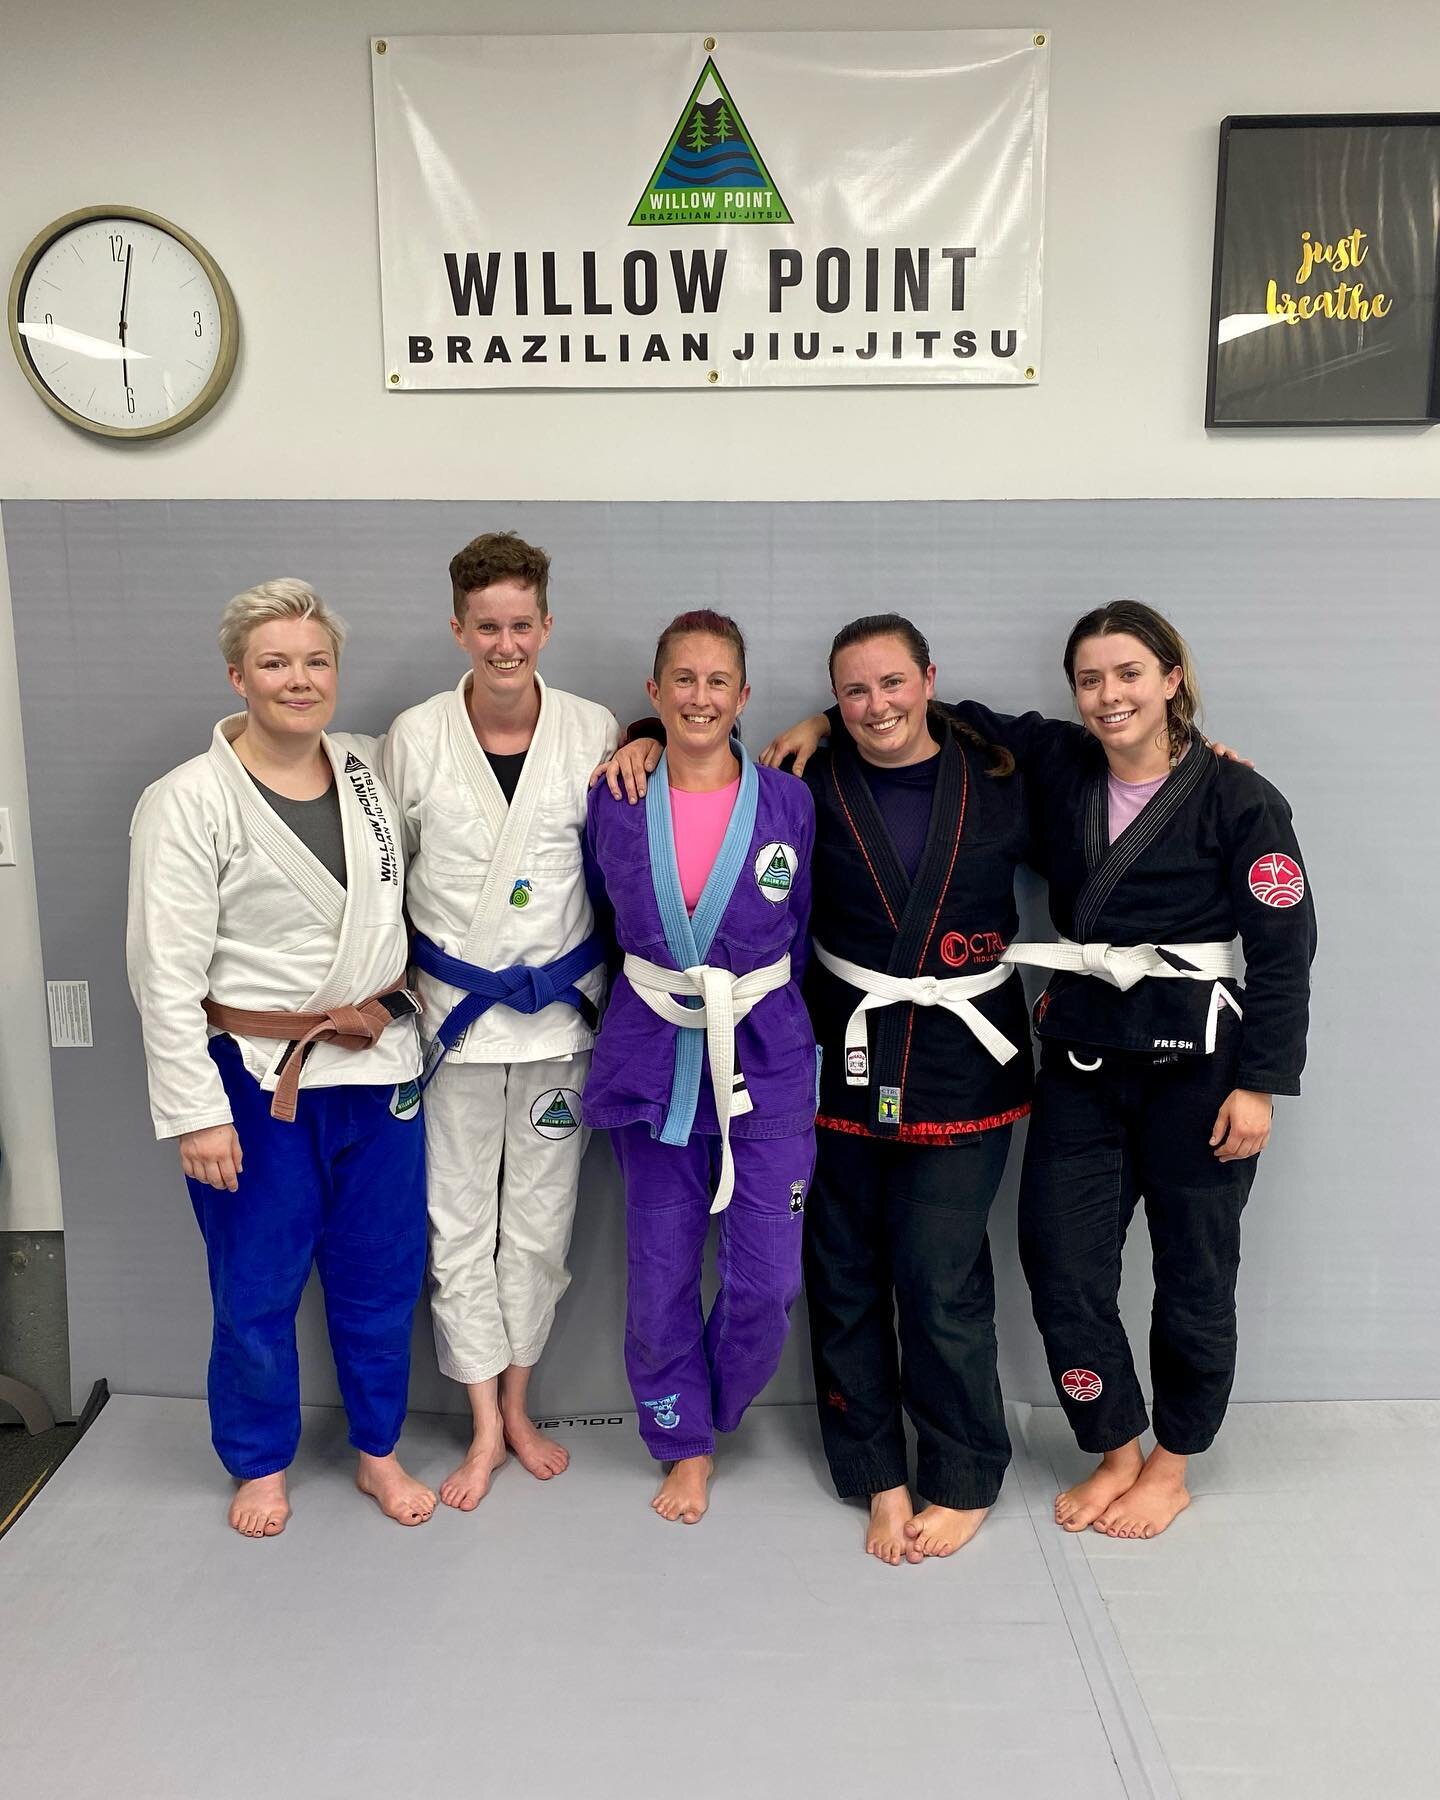 The inaugural womens only class lastnight @willowpointbjj 

After having Herman and now working towards regaining my strength and ability to train it feels wonderful to start a ladies only class every Thursday 5-6pm. Thank you ladies so much for comi